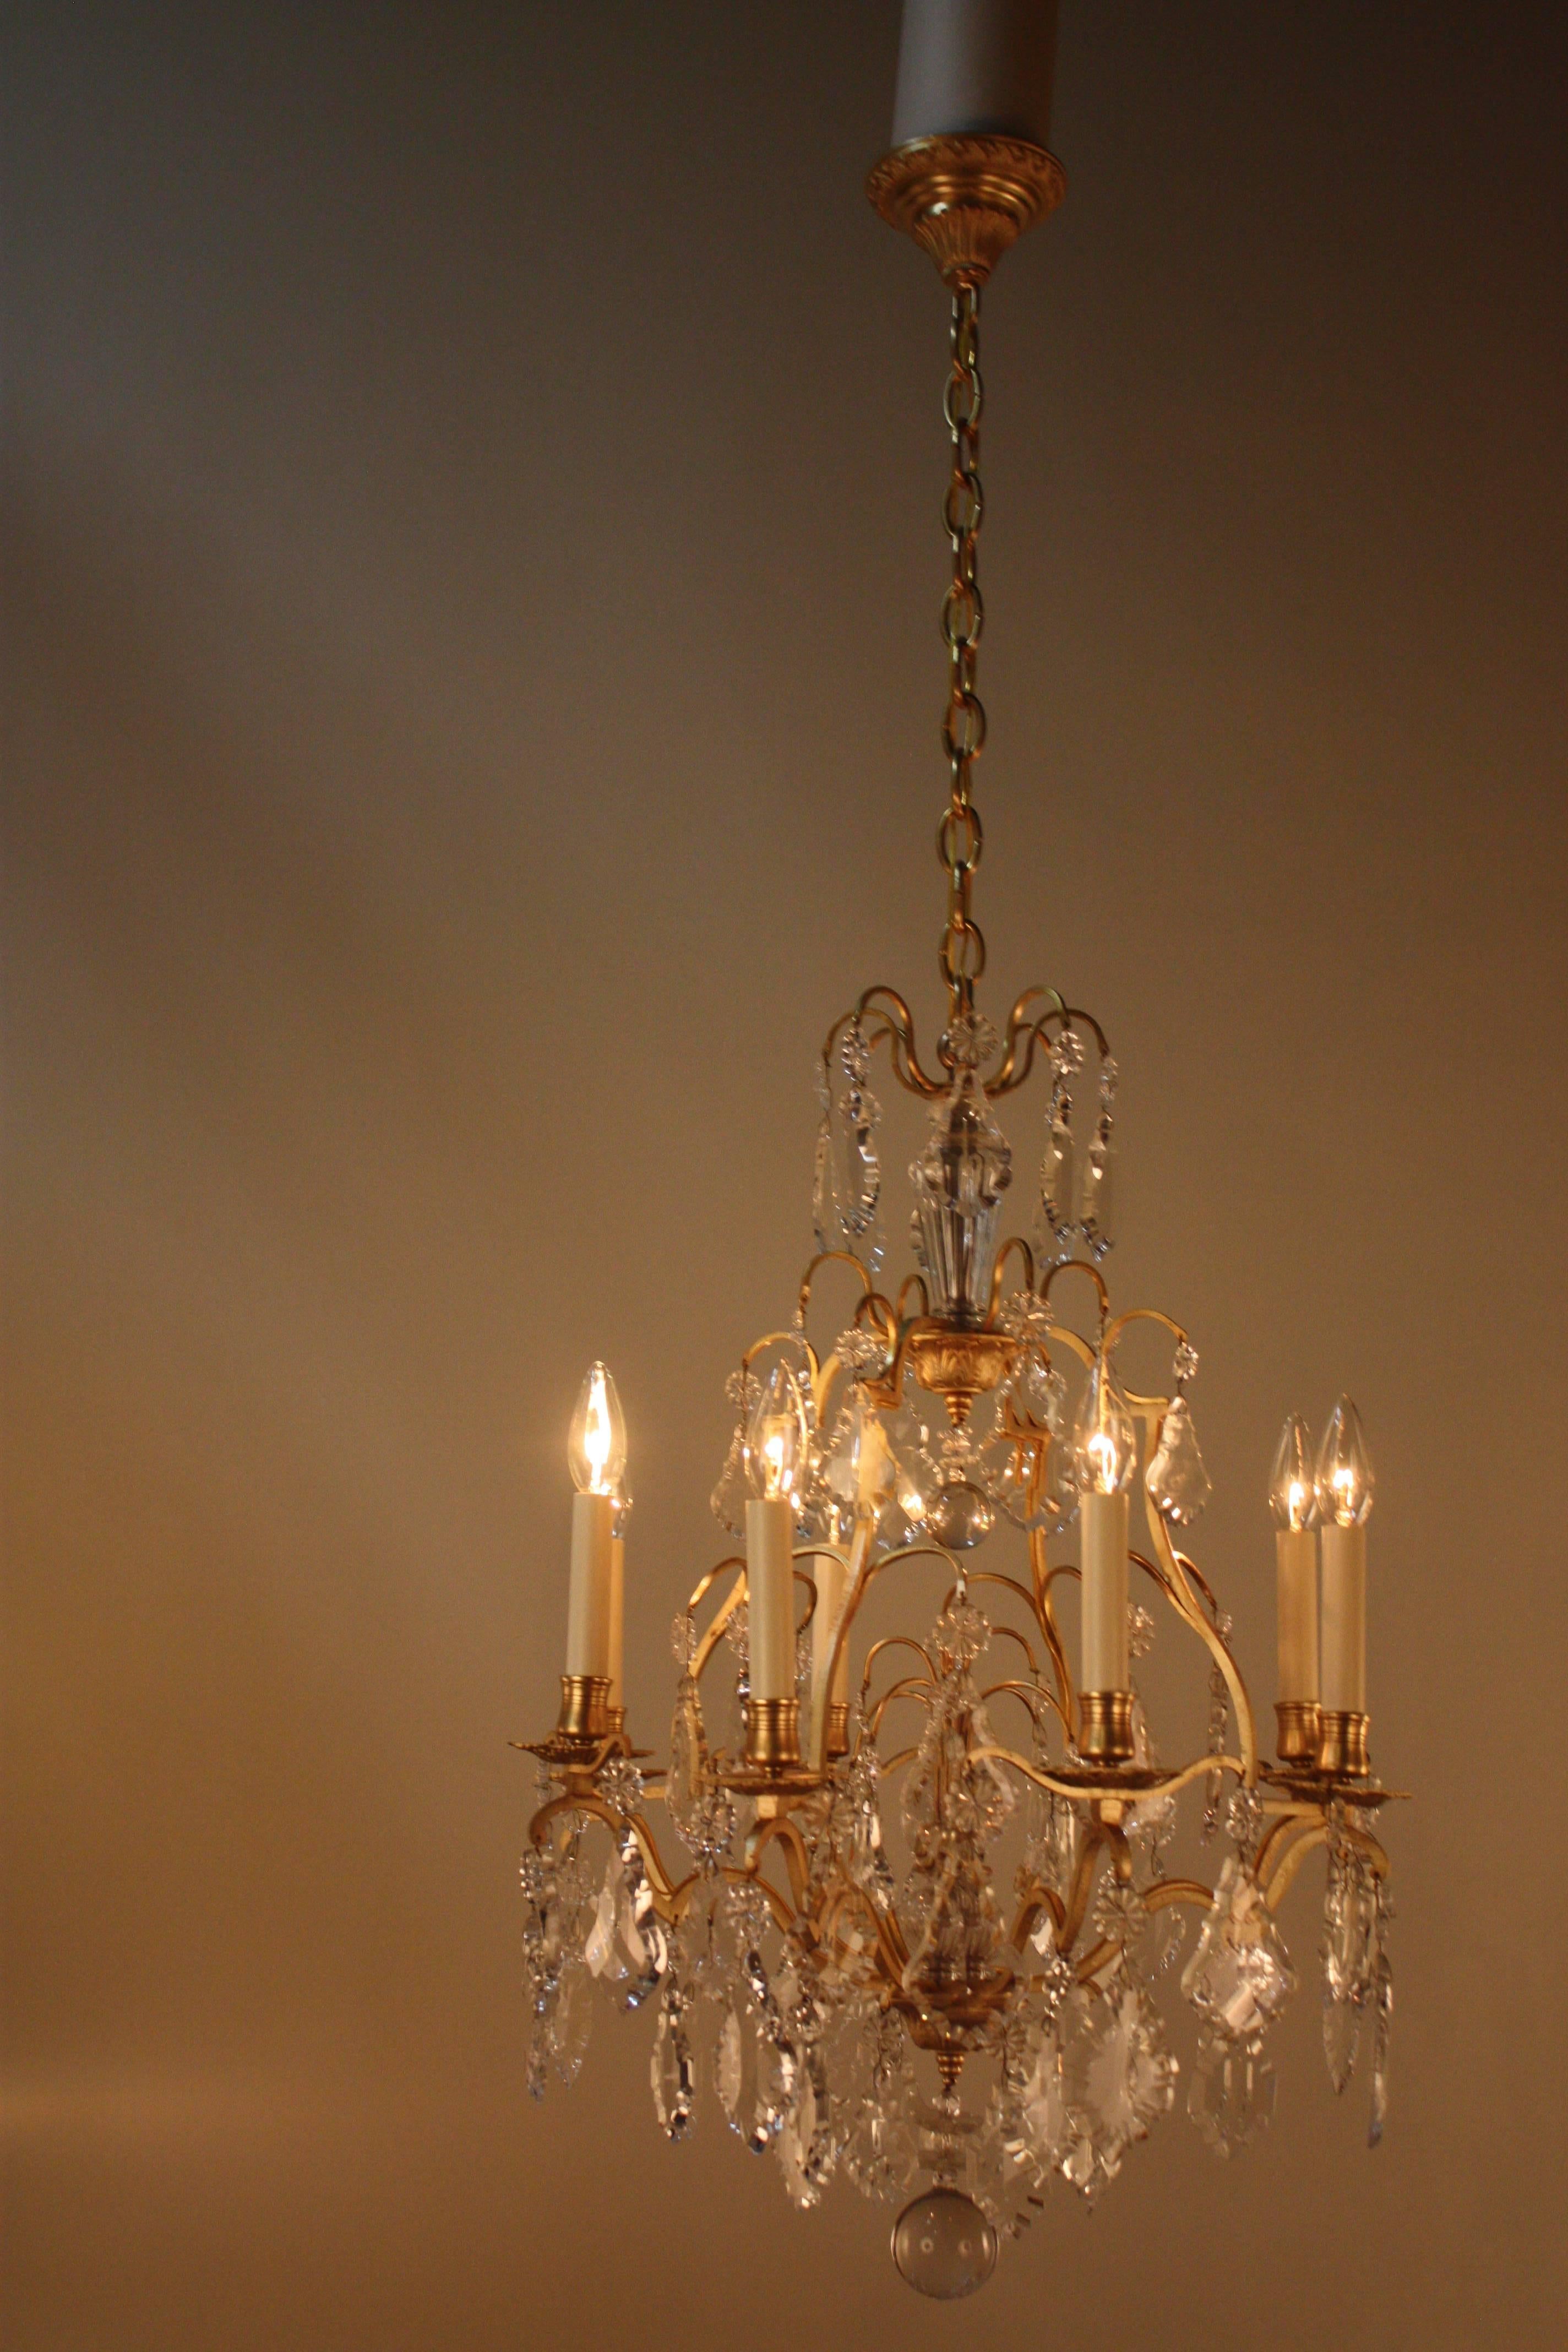 Beautiful and elegant 1930s eight-light crystal and bronze chandelier.
Minimum height fully installed with three links of chain and canopy is 32